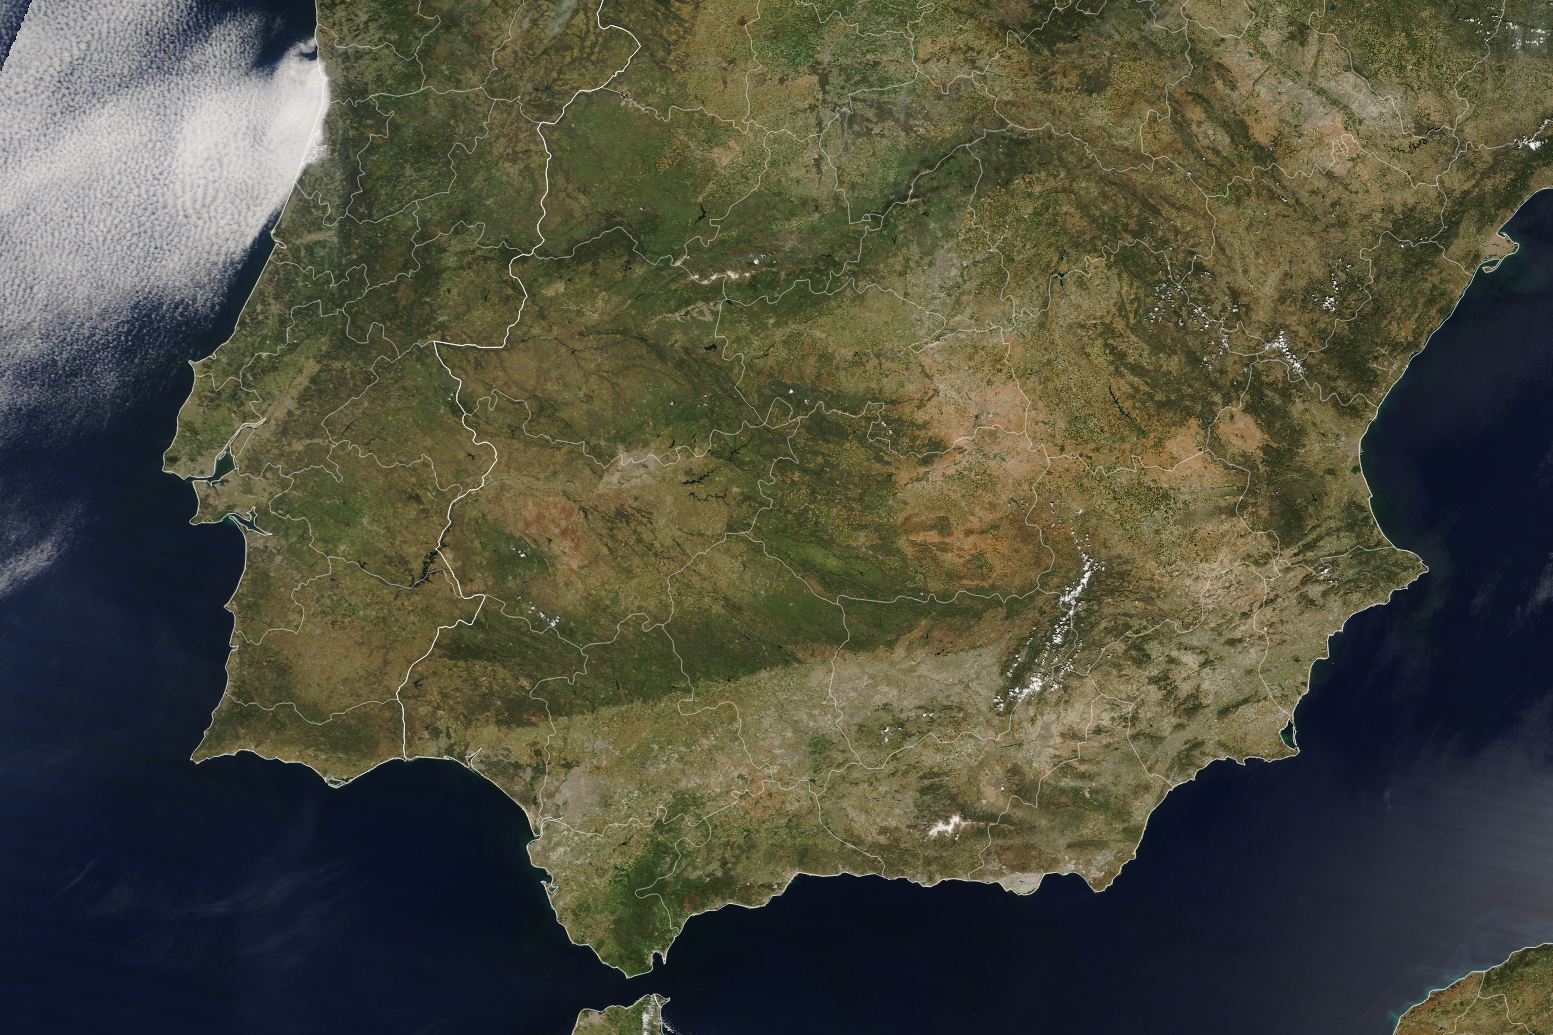 Spain Browned by Drought - related image preview